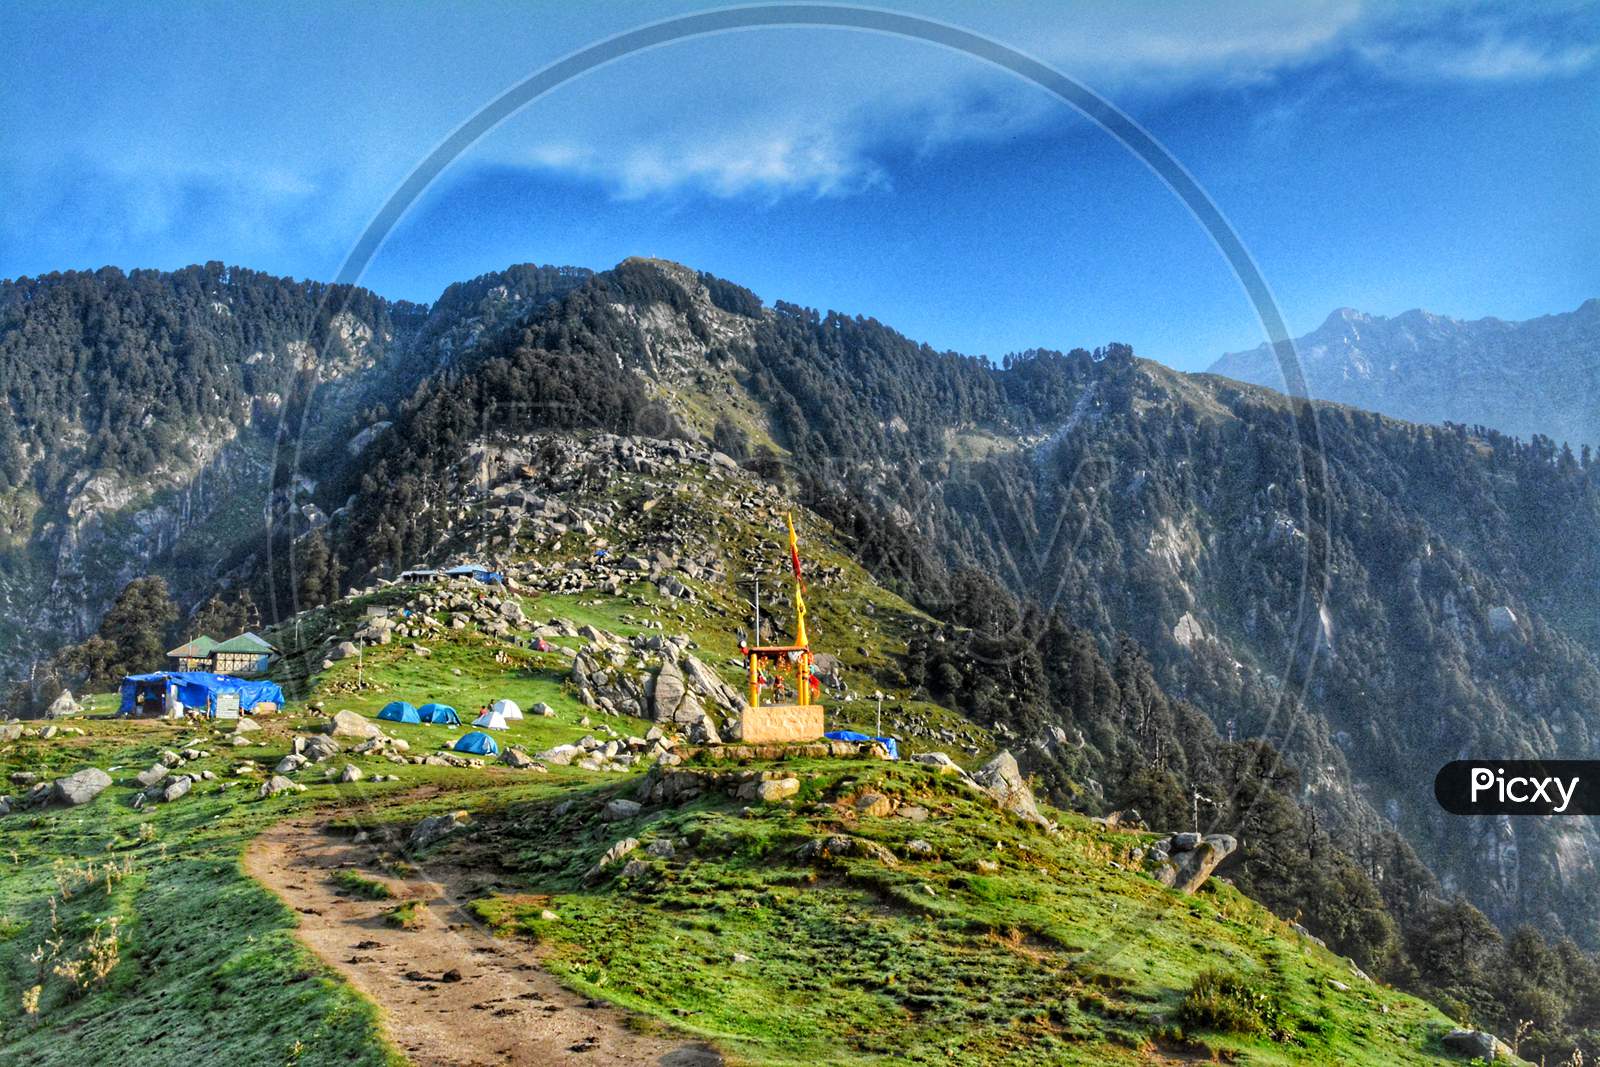 Top of the Triund Hill in Himachal Pradesh